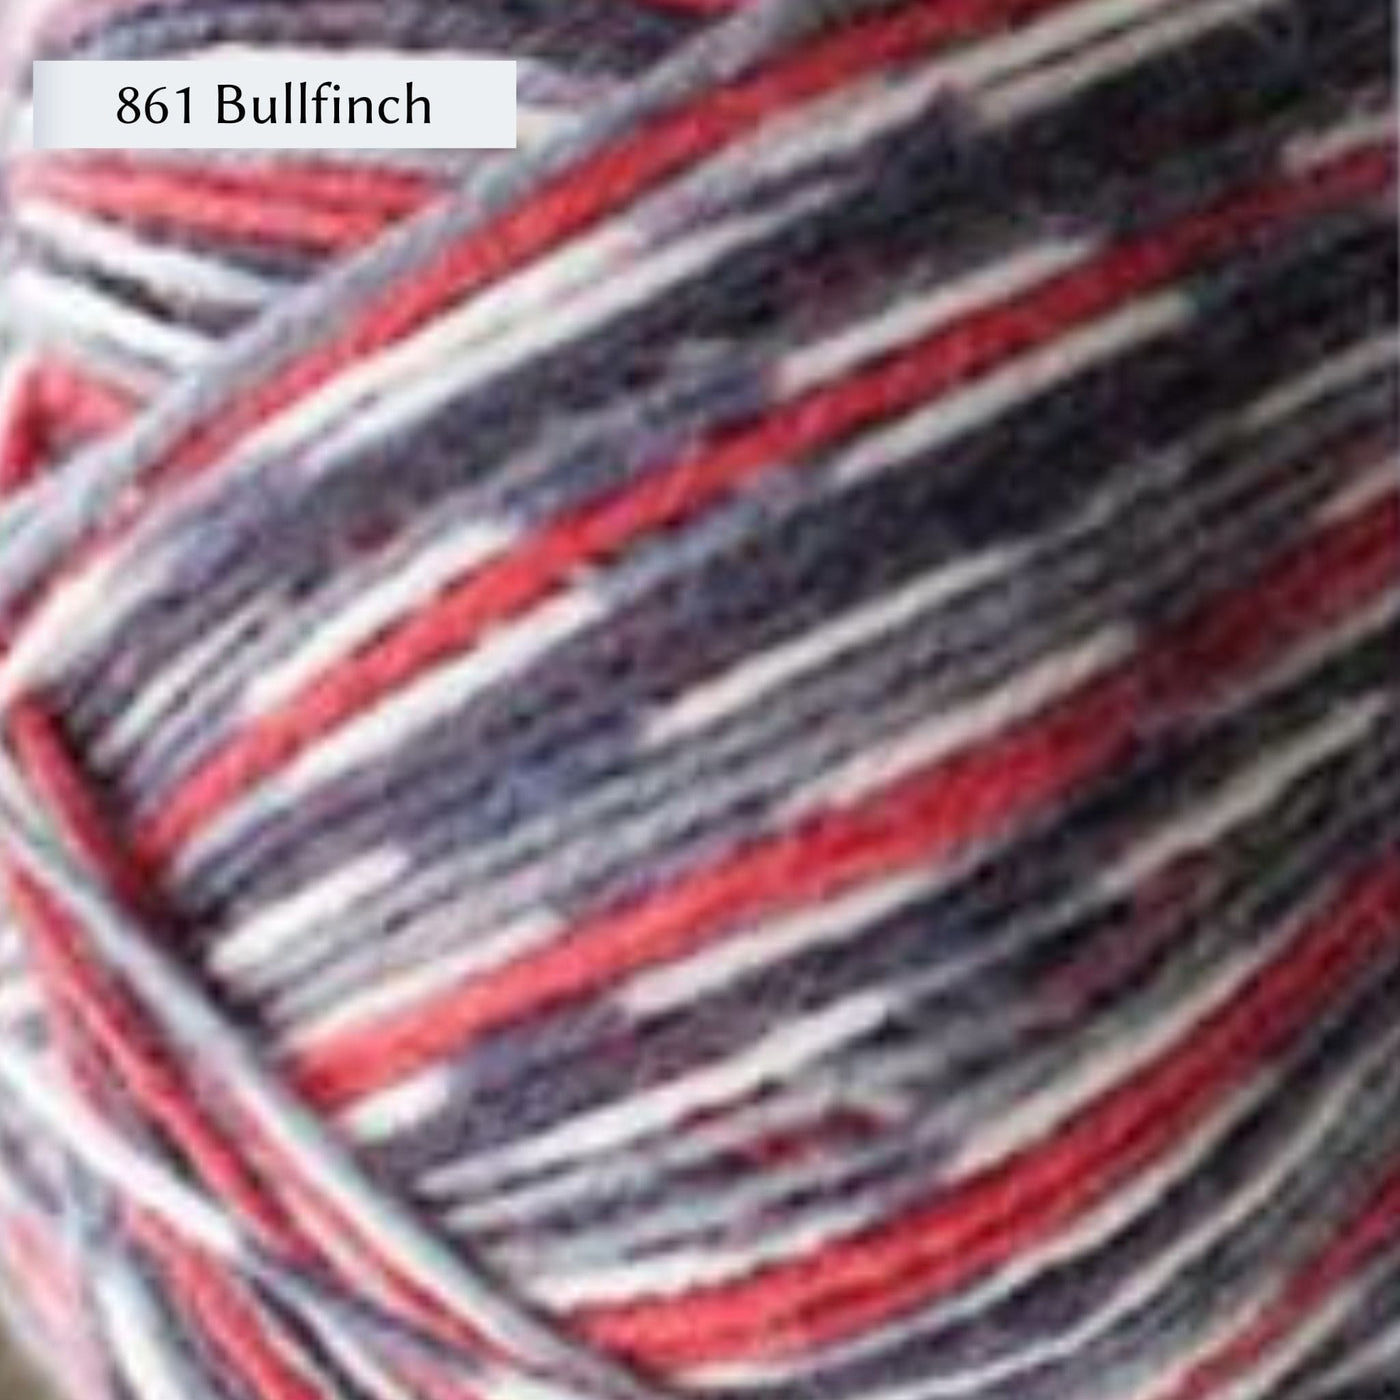 West Yorkshire Spinners Signature 4ply yarn, fingering weight, in color 861 Bullfinch, a bird-inspired colorway with red, dark grey, and light grey stripes, and self-patterning section of grey and white